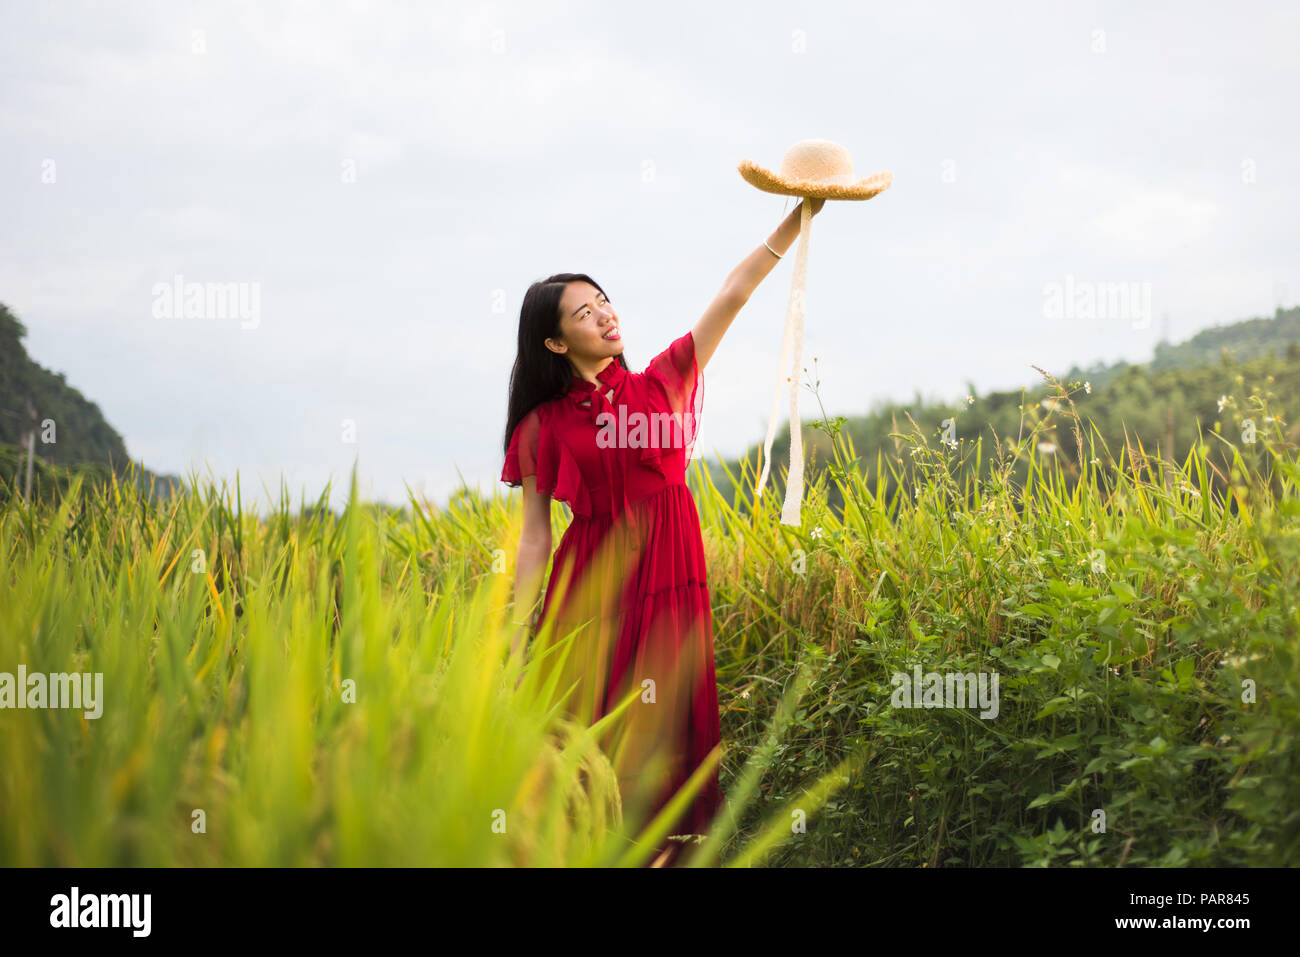 Girl in a rice field wearing red dress and a hat Stock Photo